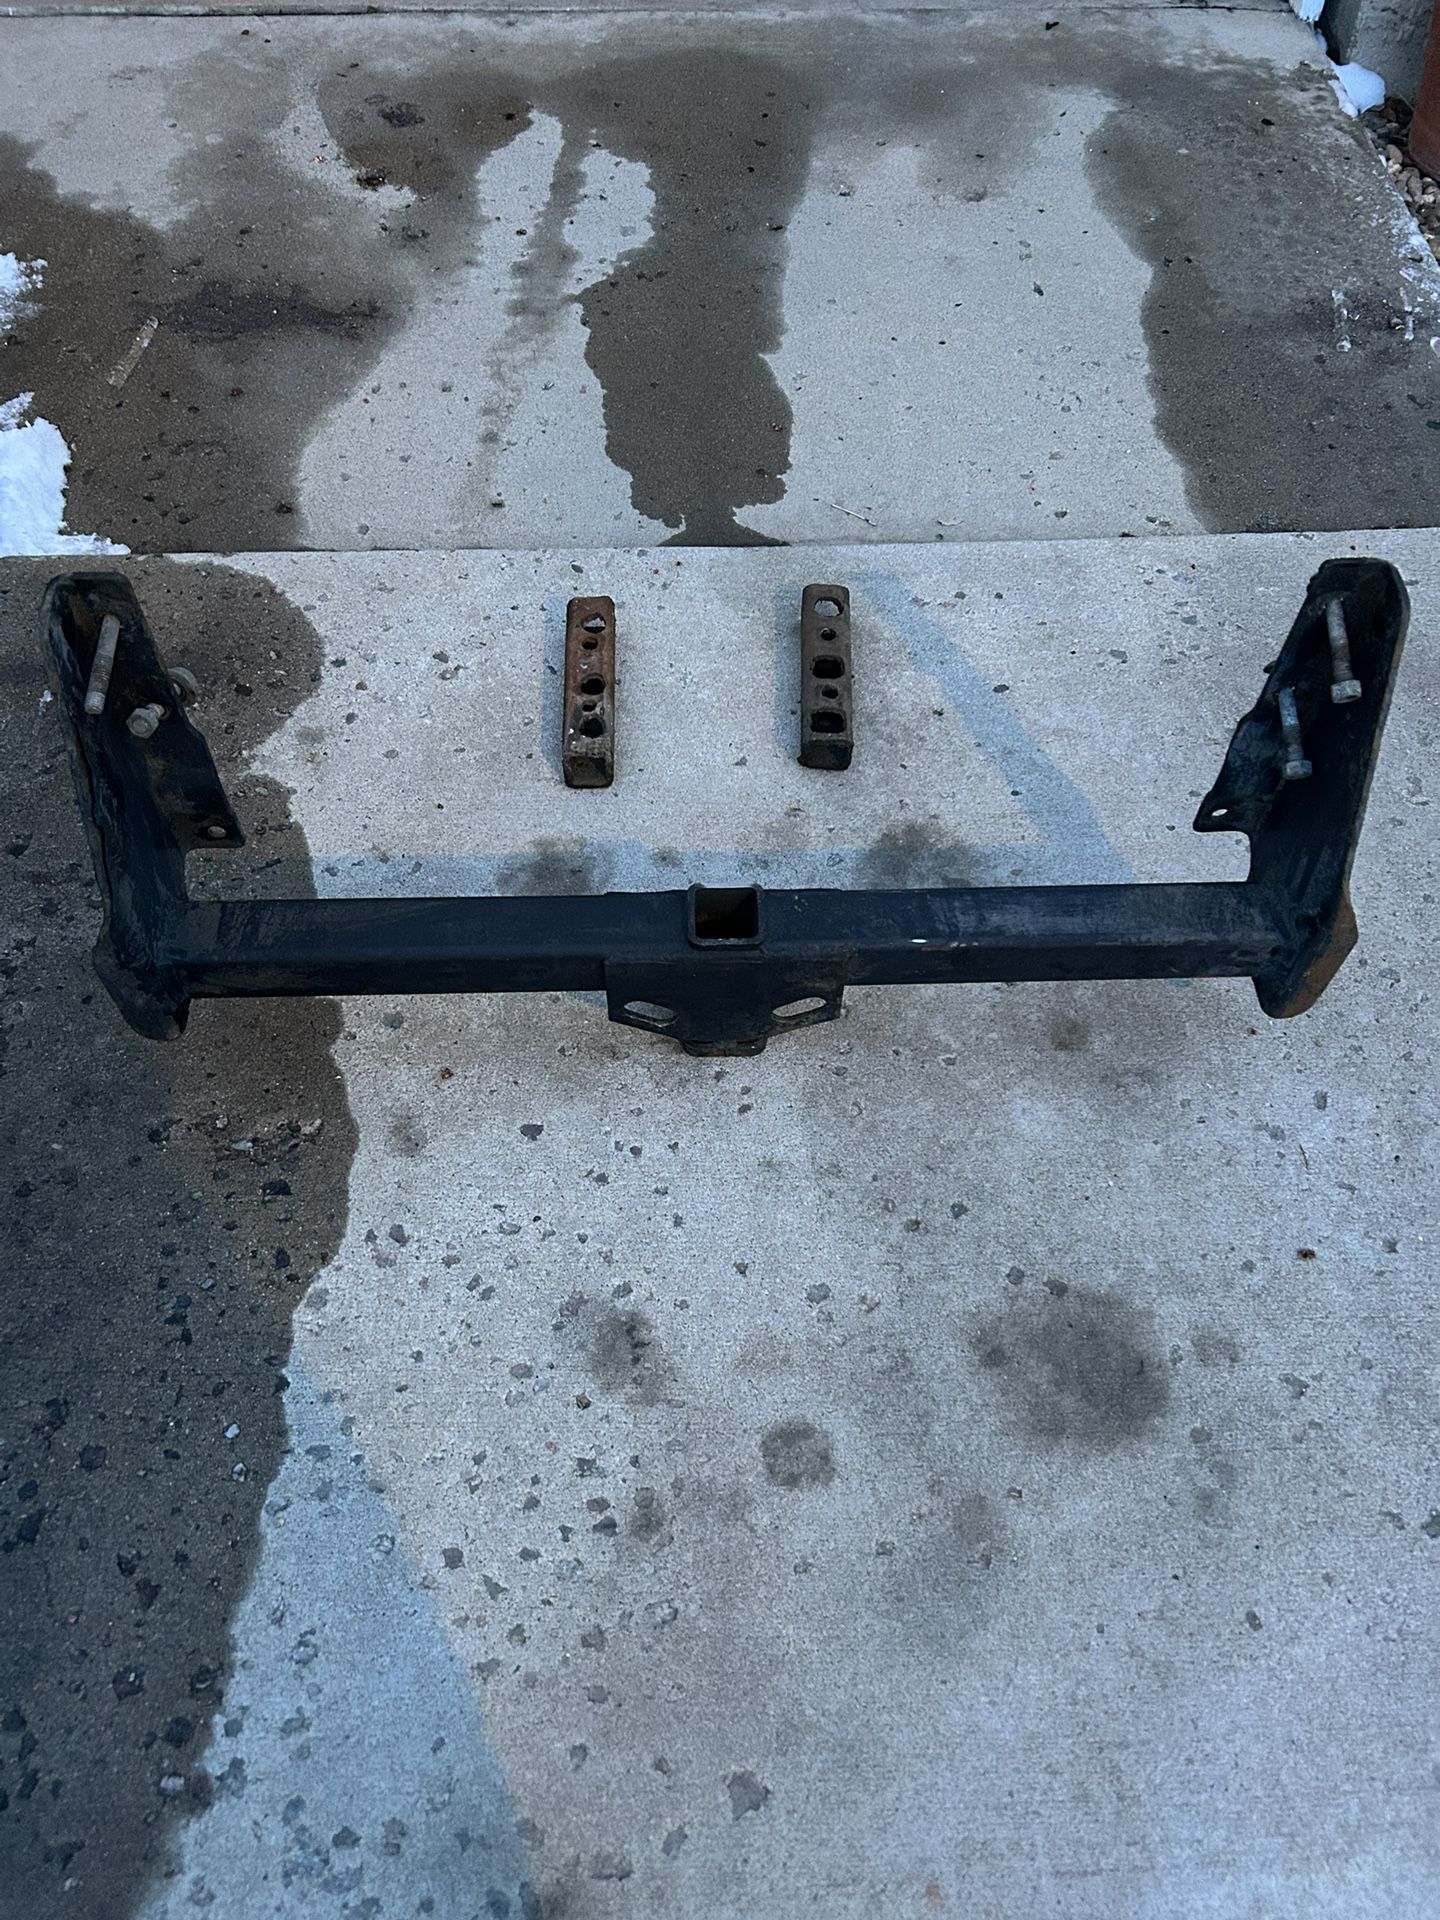 Tow hitch Receiver